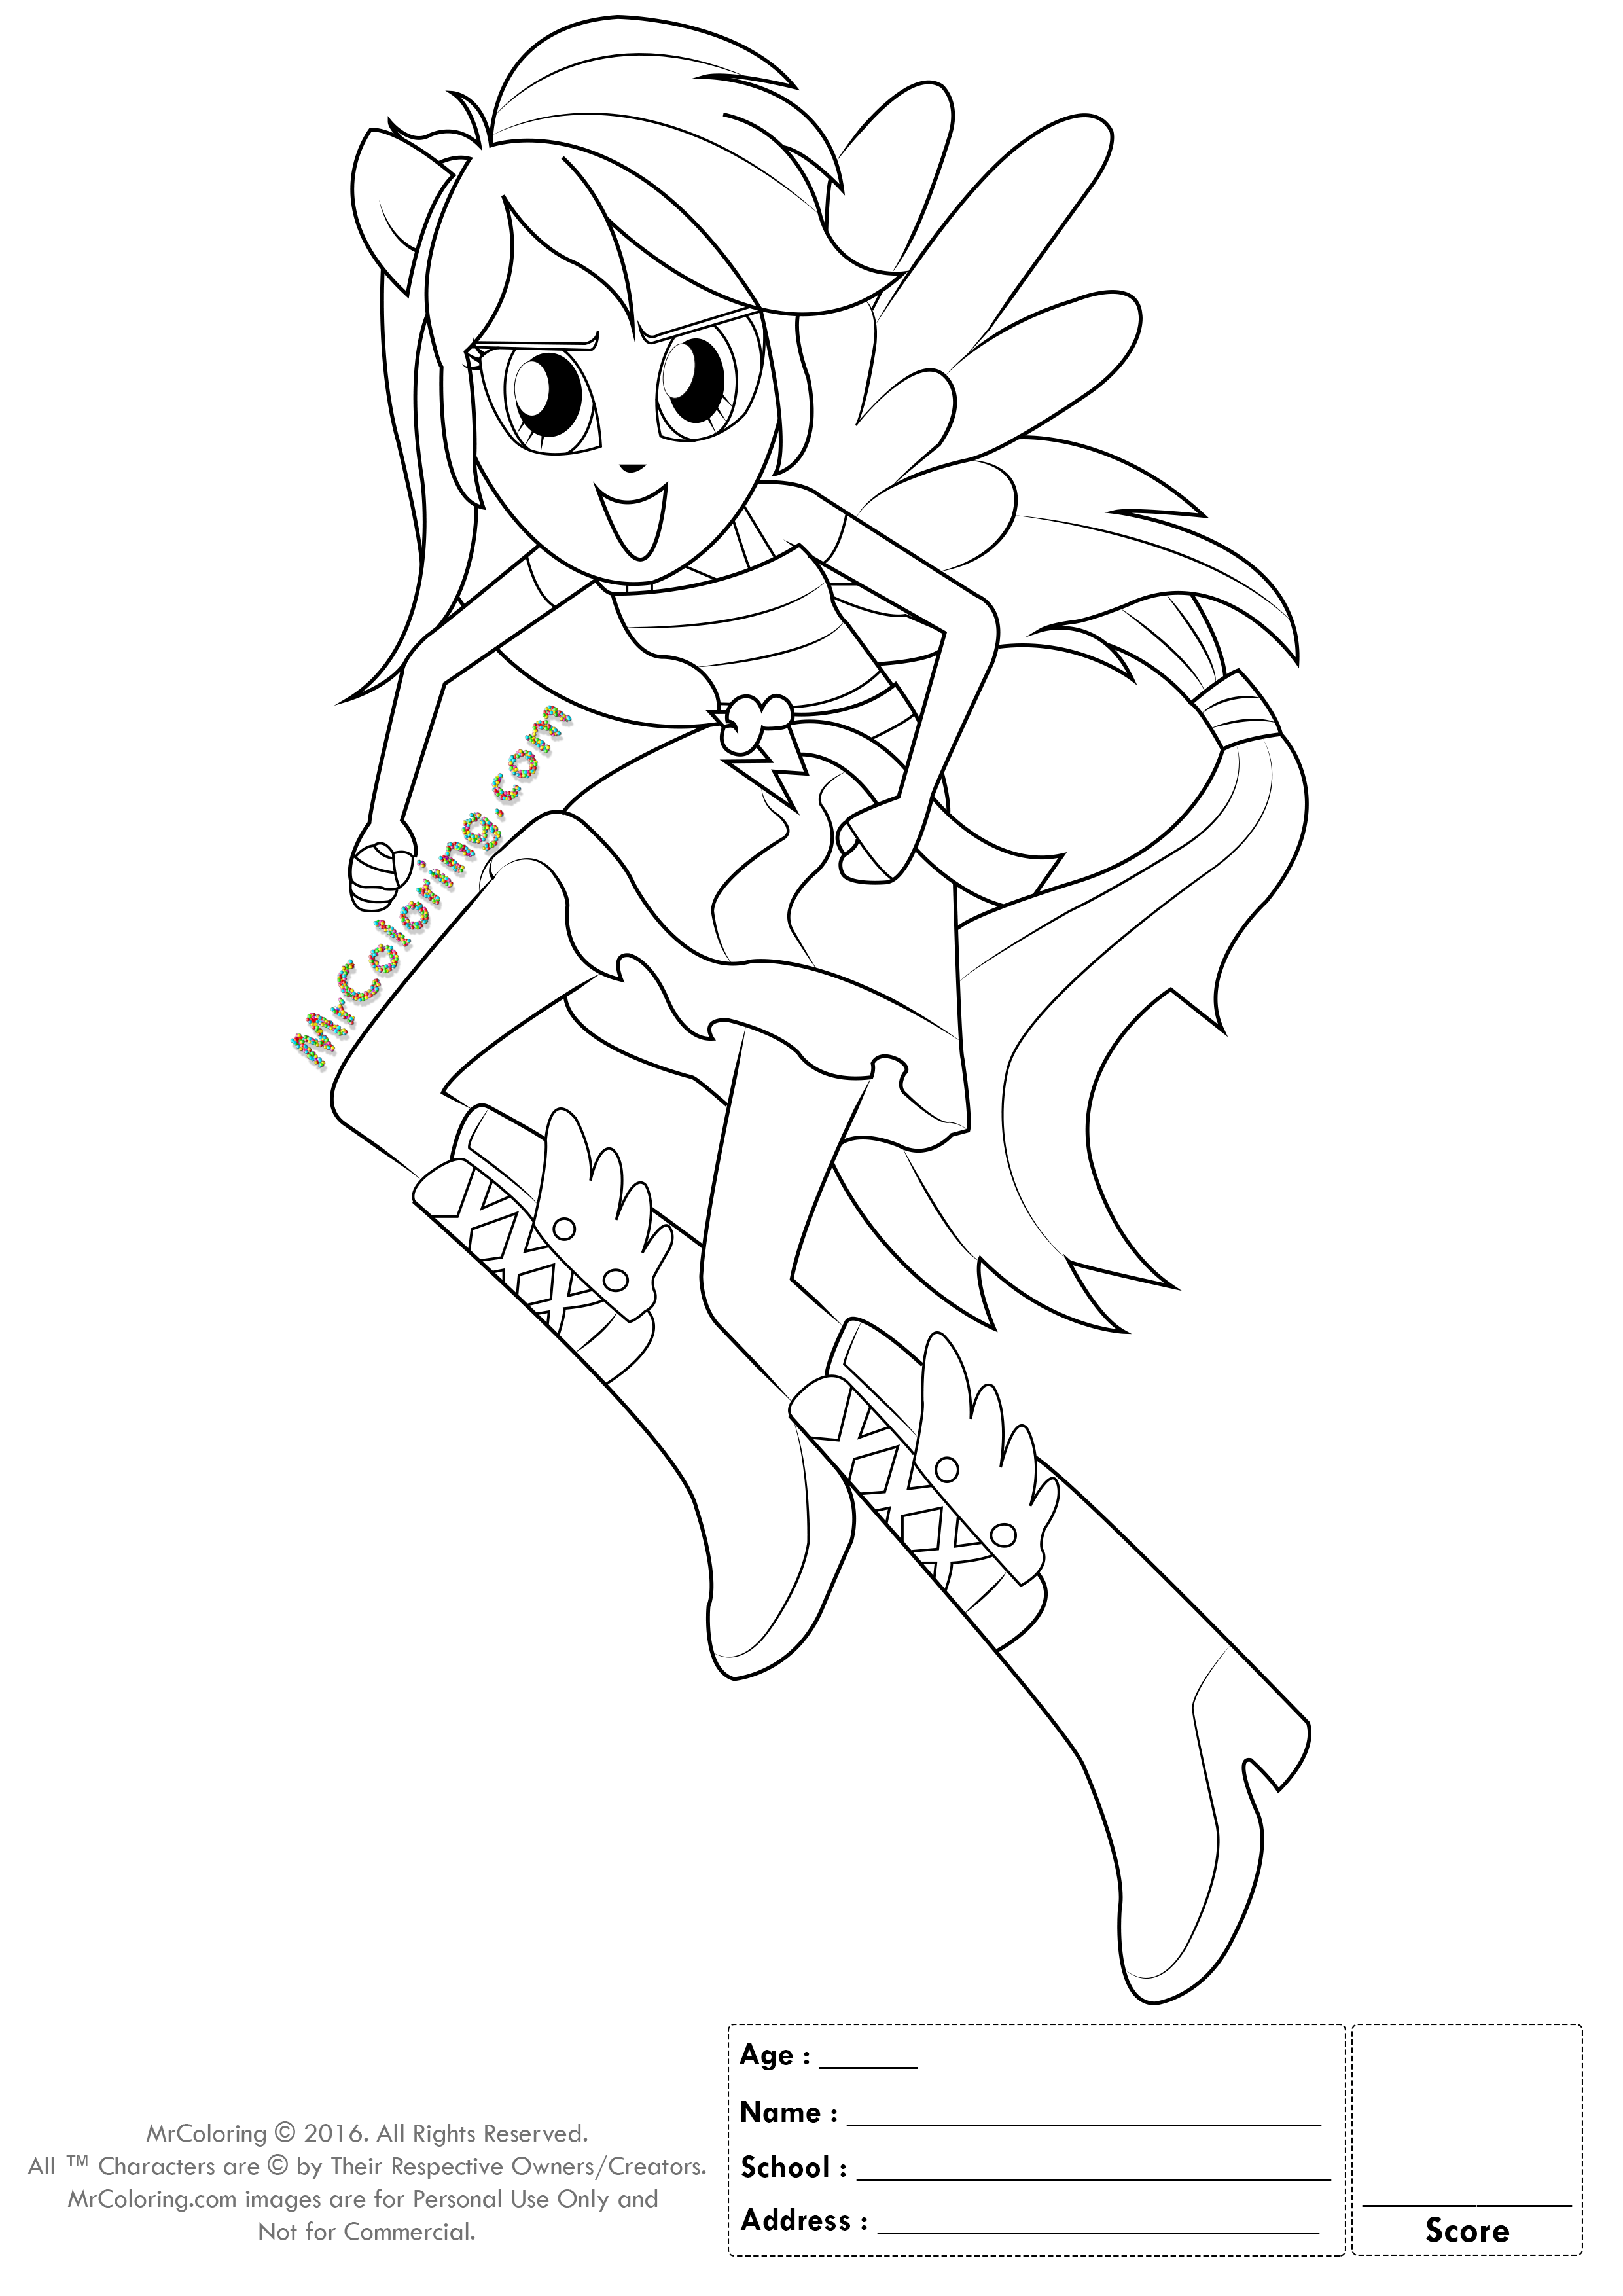 MLP Rainbow Dash Equestria Girls Coloring Pages - 2 | MrColoring.com